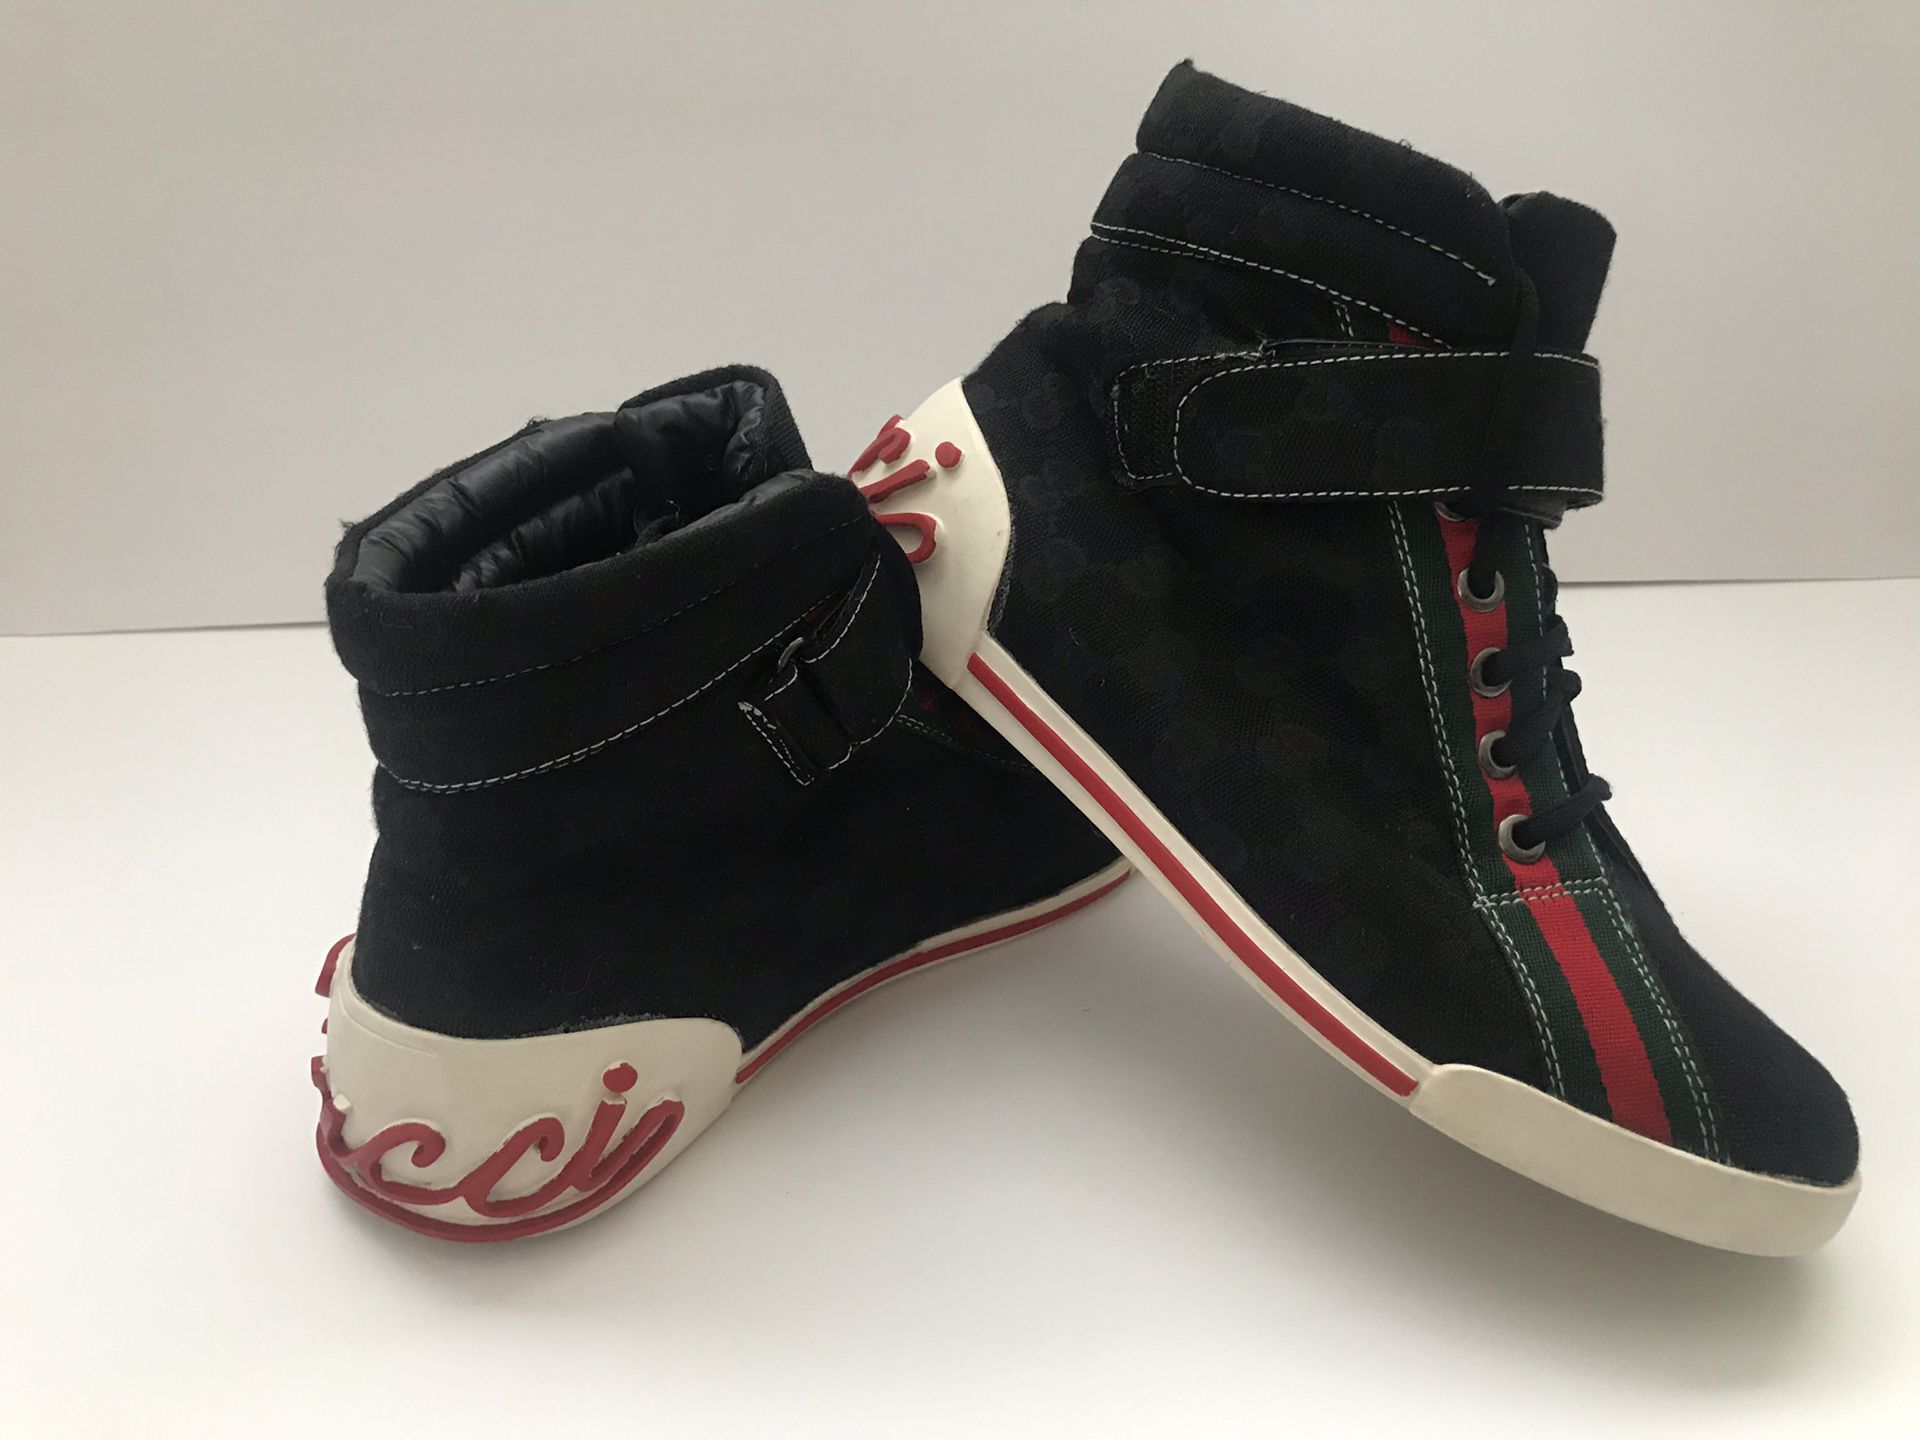 Gucci special edition high top size 8